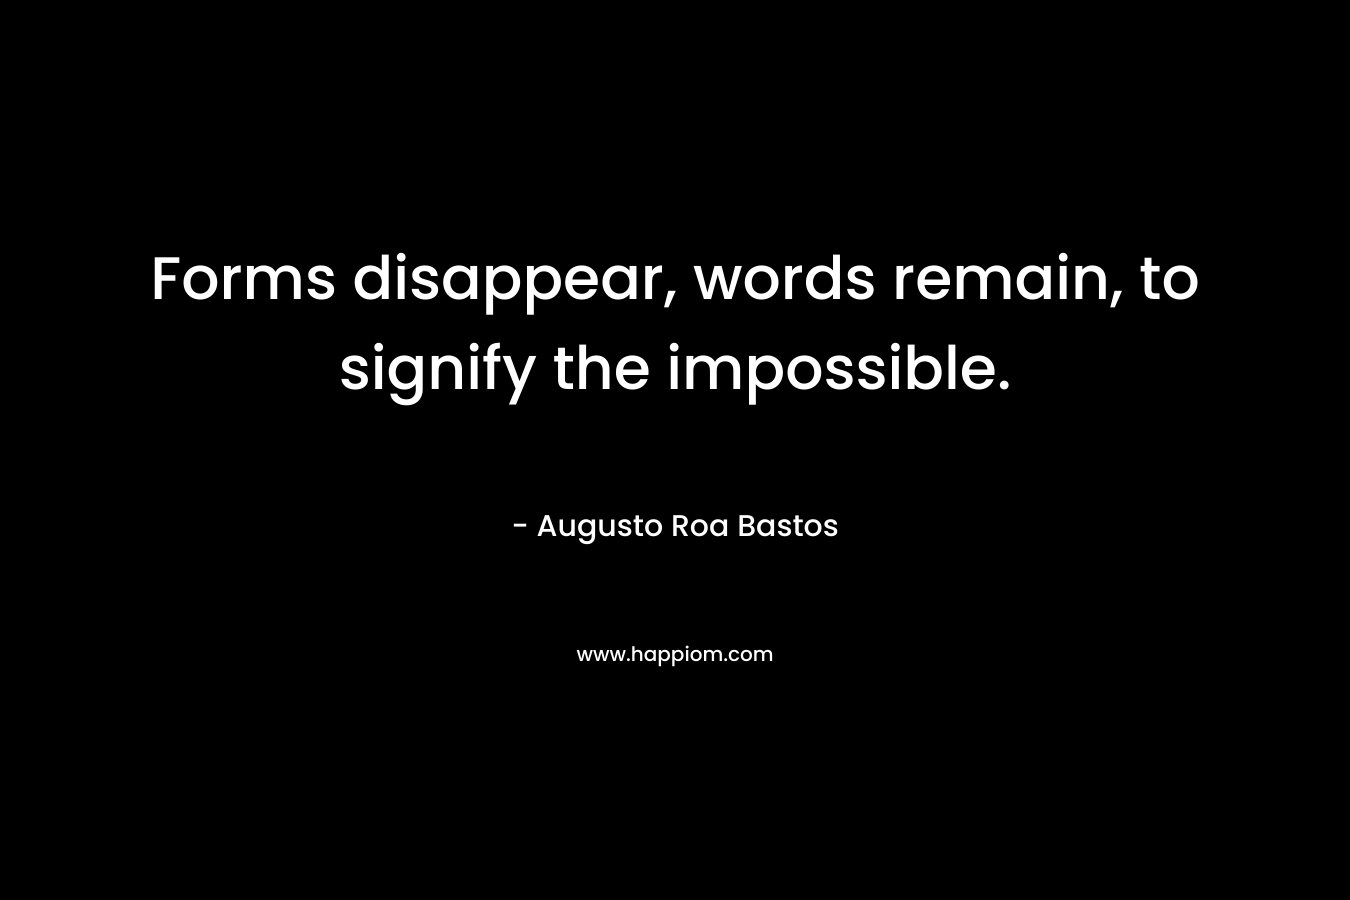 Forms disappear, words remain, to signify the impossible. – Augusto Roa Bastos